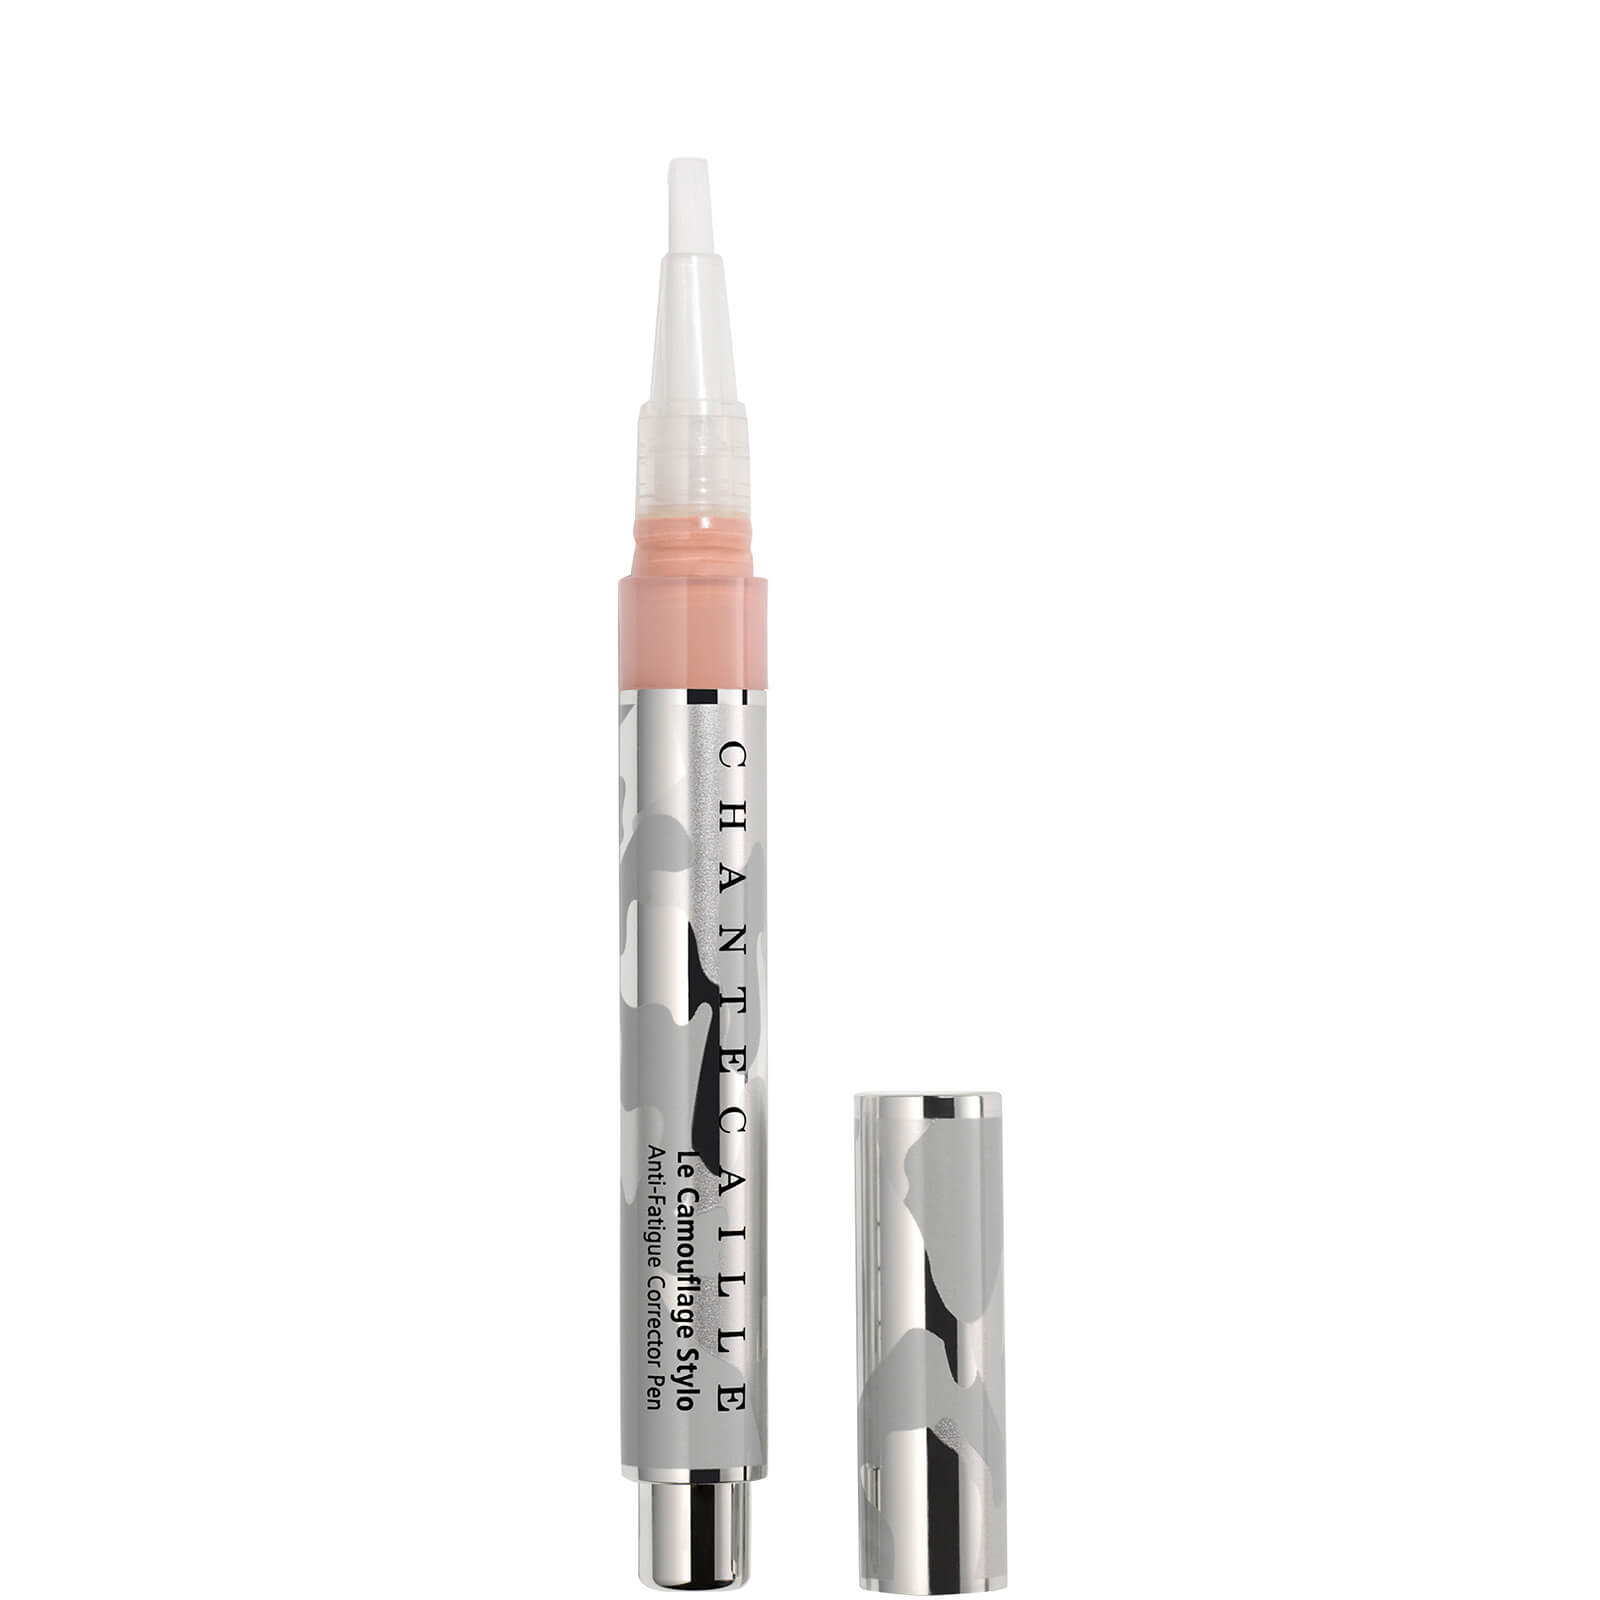 Chantecaille Le Camouflage Stylo Concealer - #4C